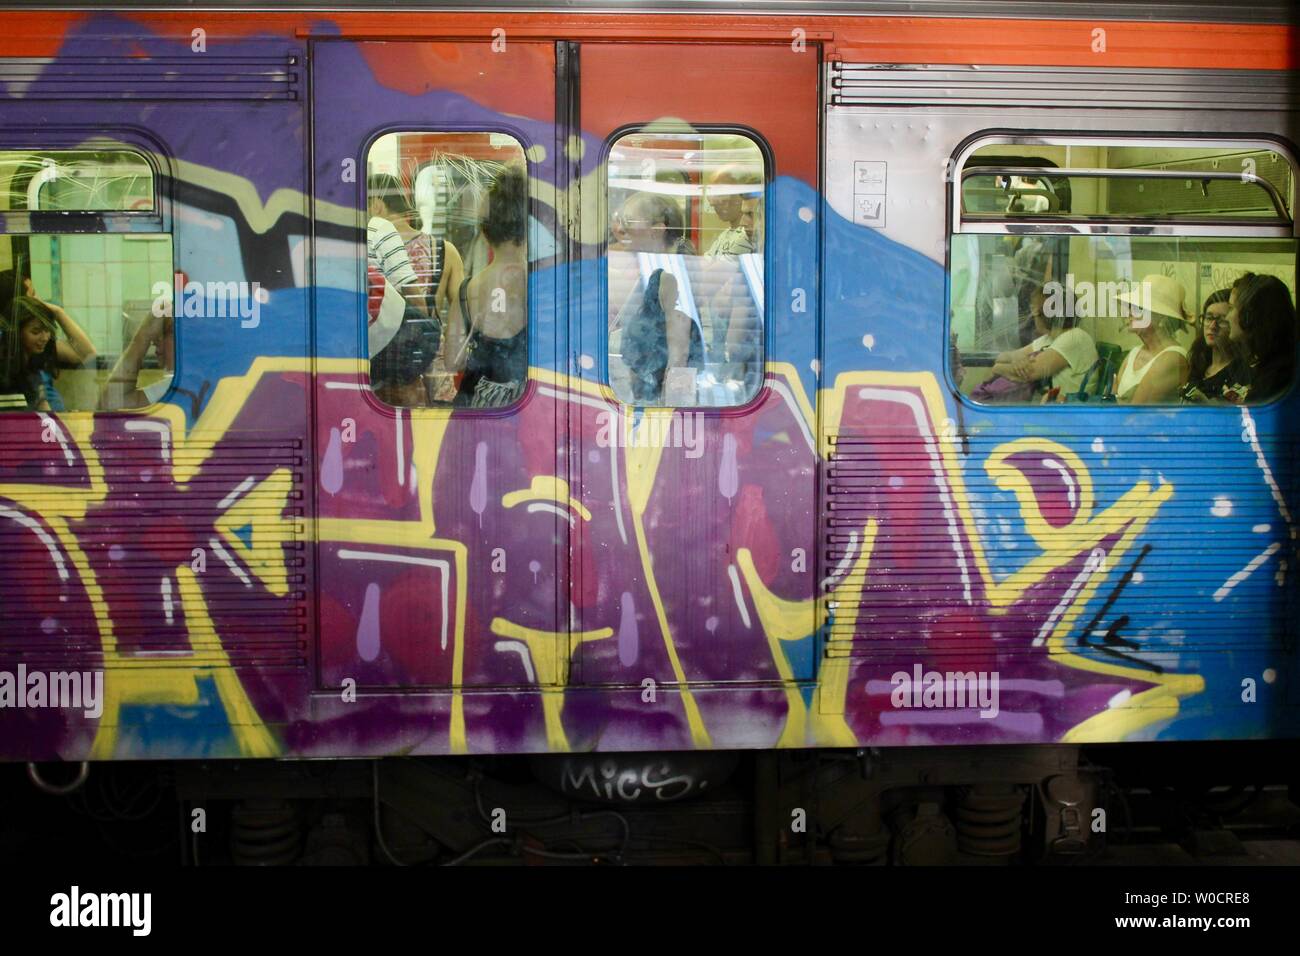 heavily graffitied passenger train in athens greece Stock Photo